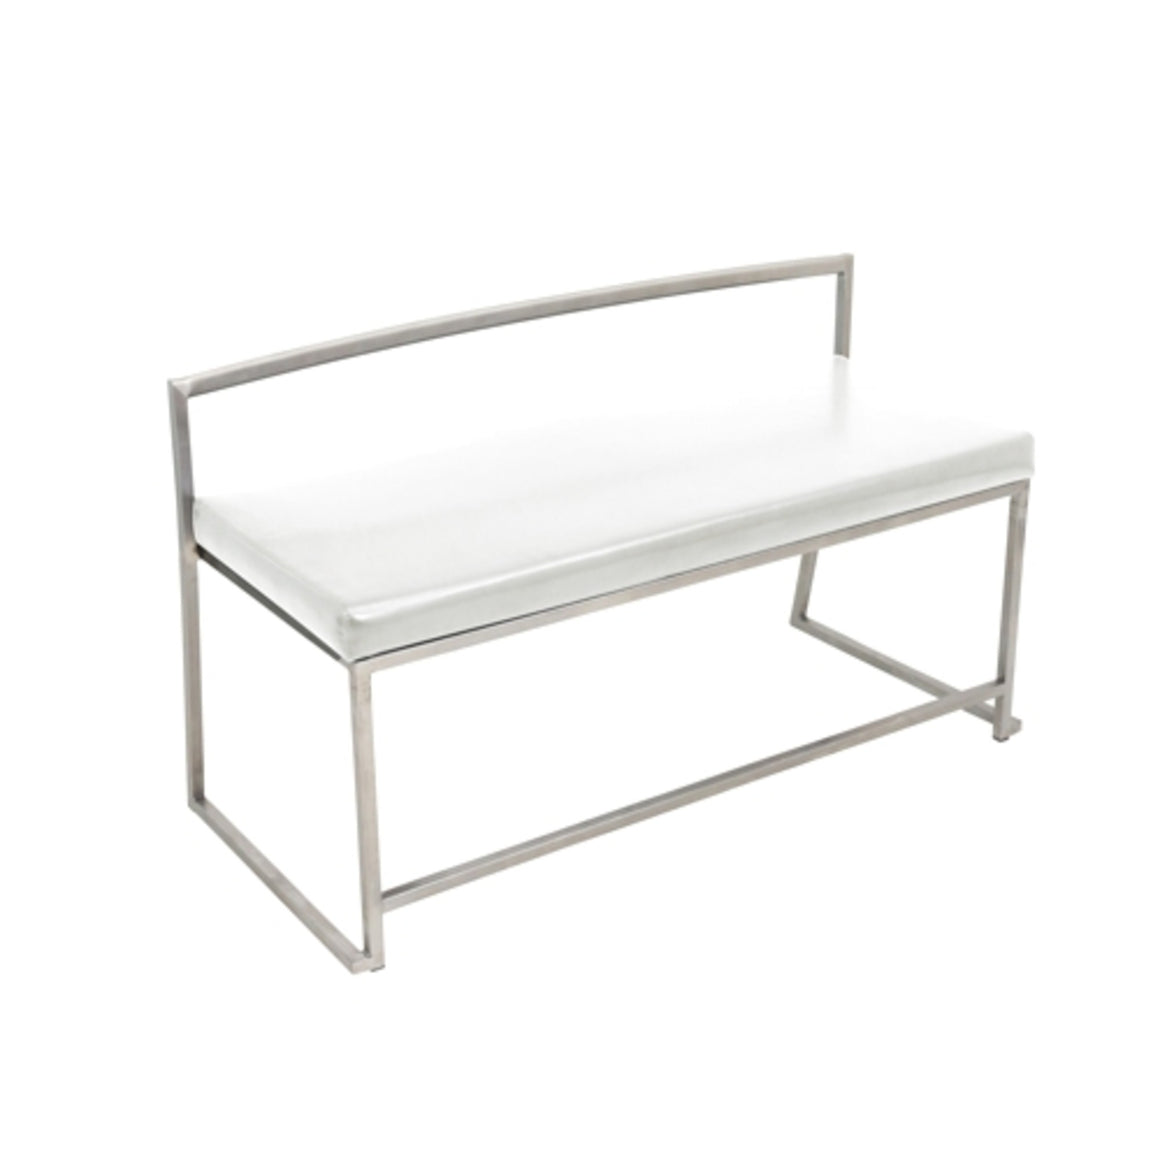 Fuji Contemporary Dining / Entryway Bench in White Faux Leather by LumiSource